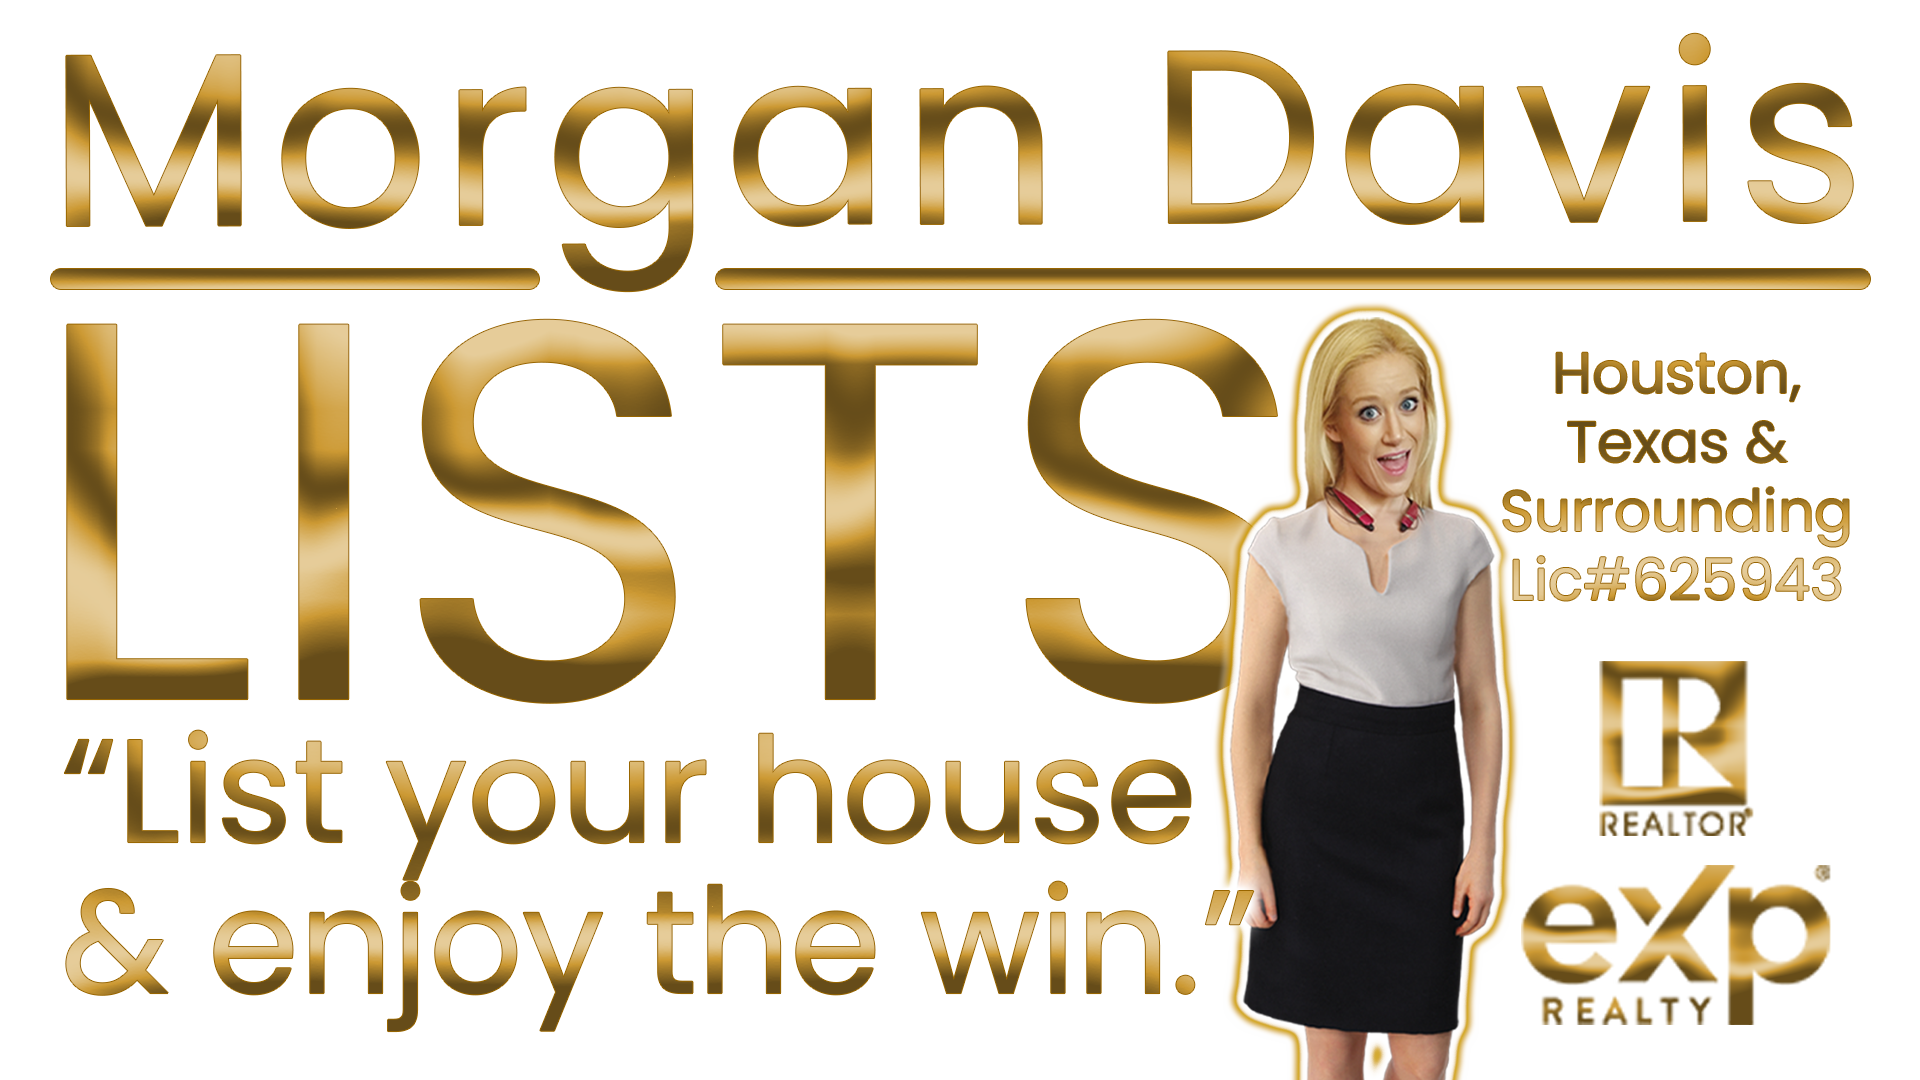 Morgan Davis Real Estate Agent Lists Houses In Houston Texas